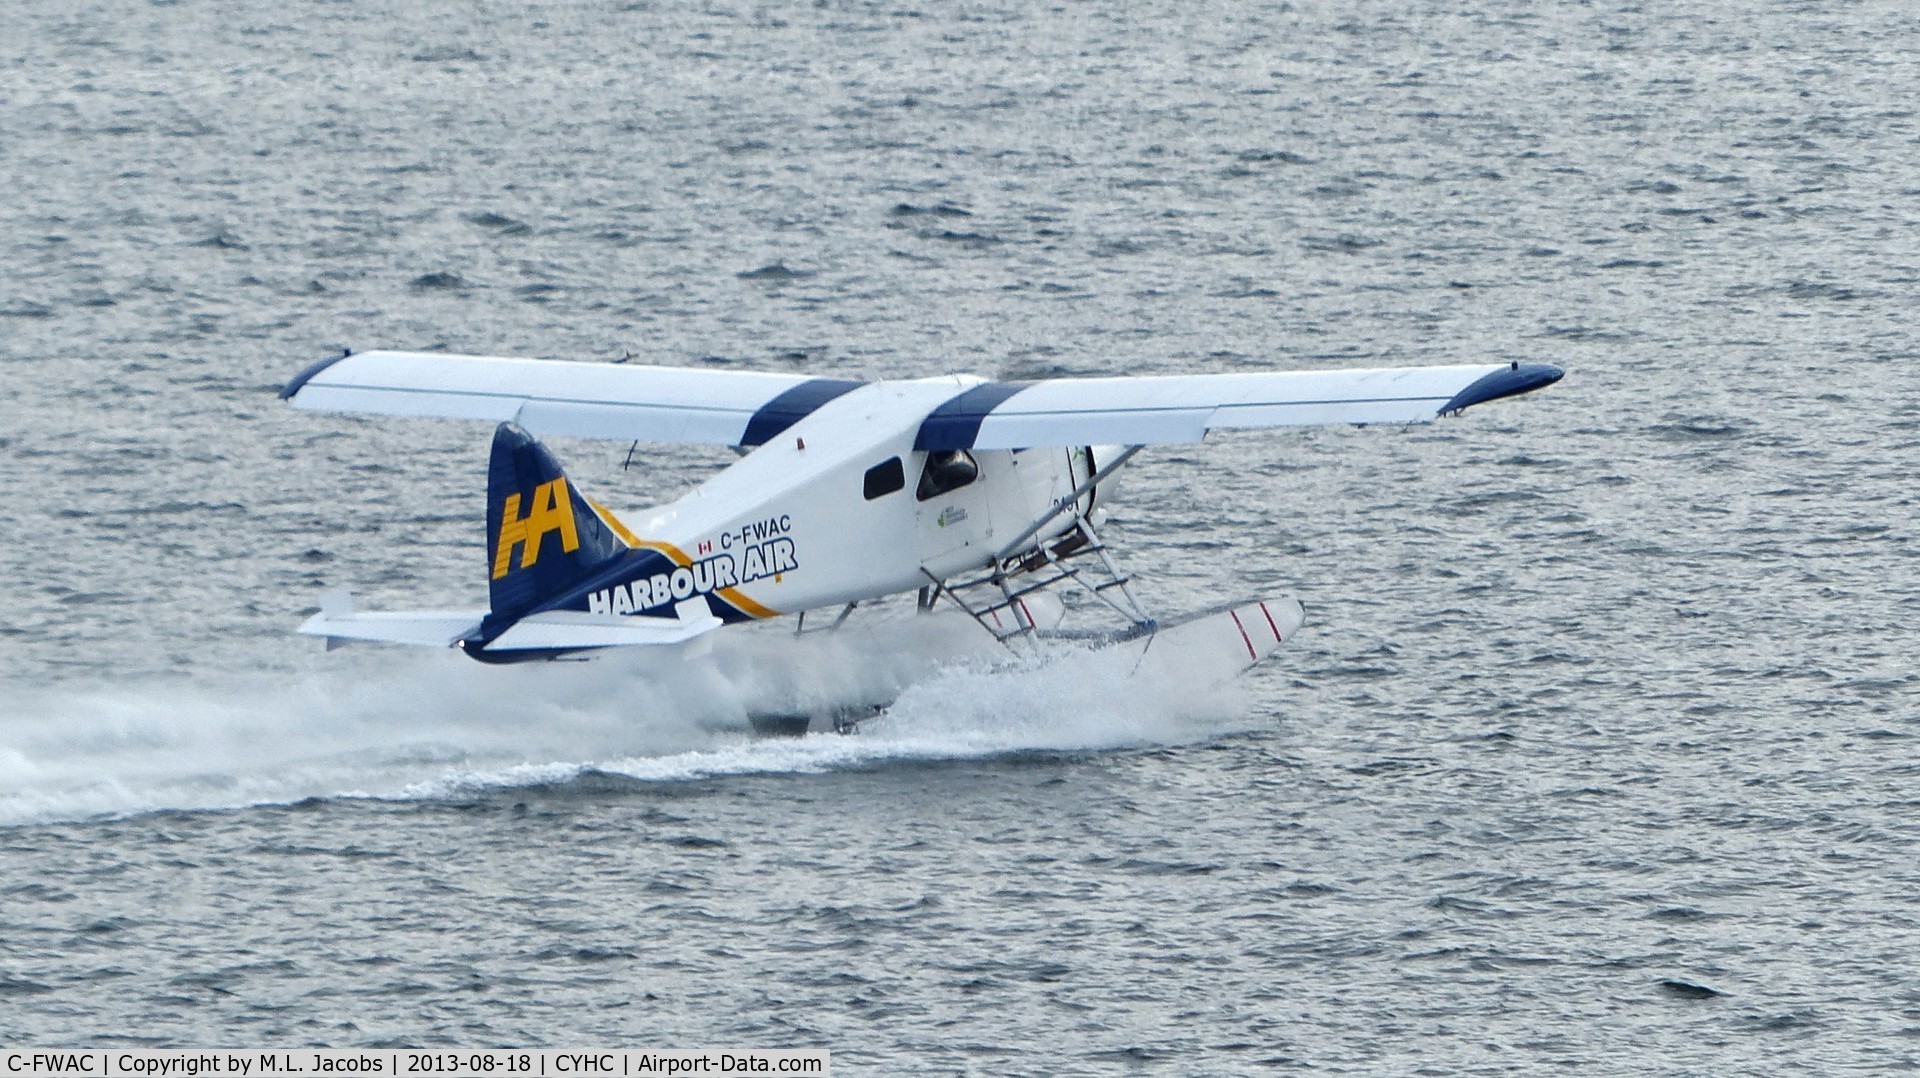 C-FWAC, 1959 De Havilland Canada DHC-2 Beaver Mk. I C/N 1356, Harbour Air #219 taking off from Coal Harbour on an overcast morning.